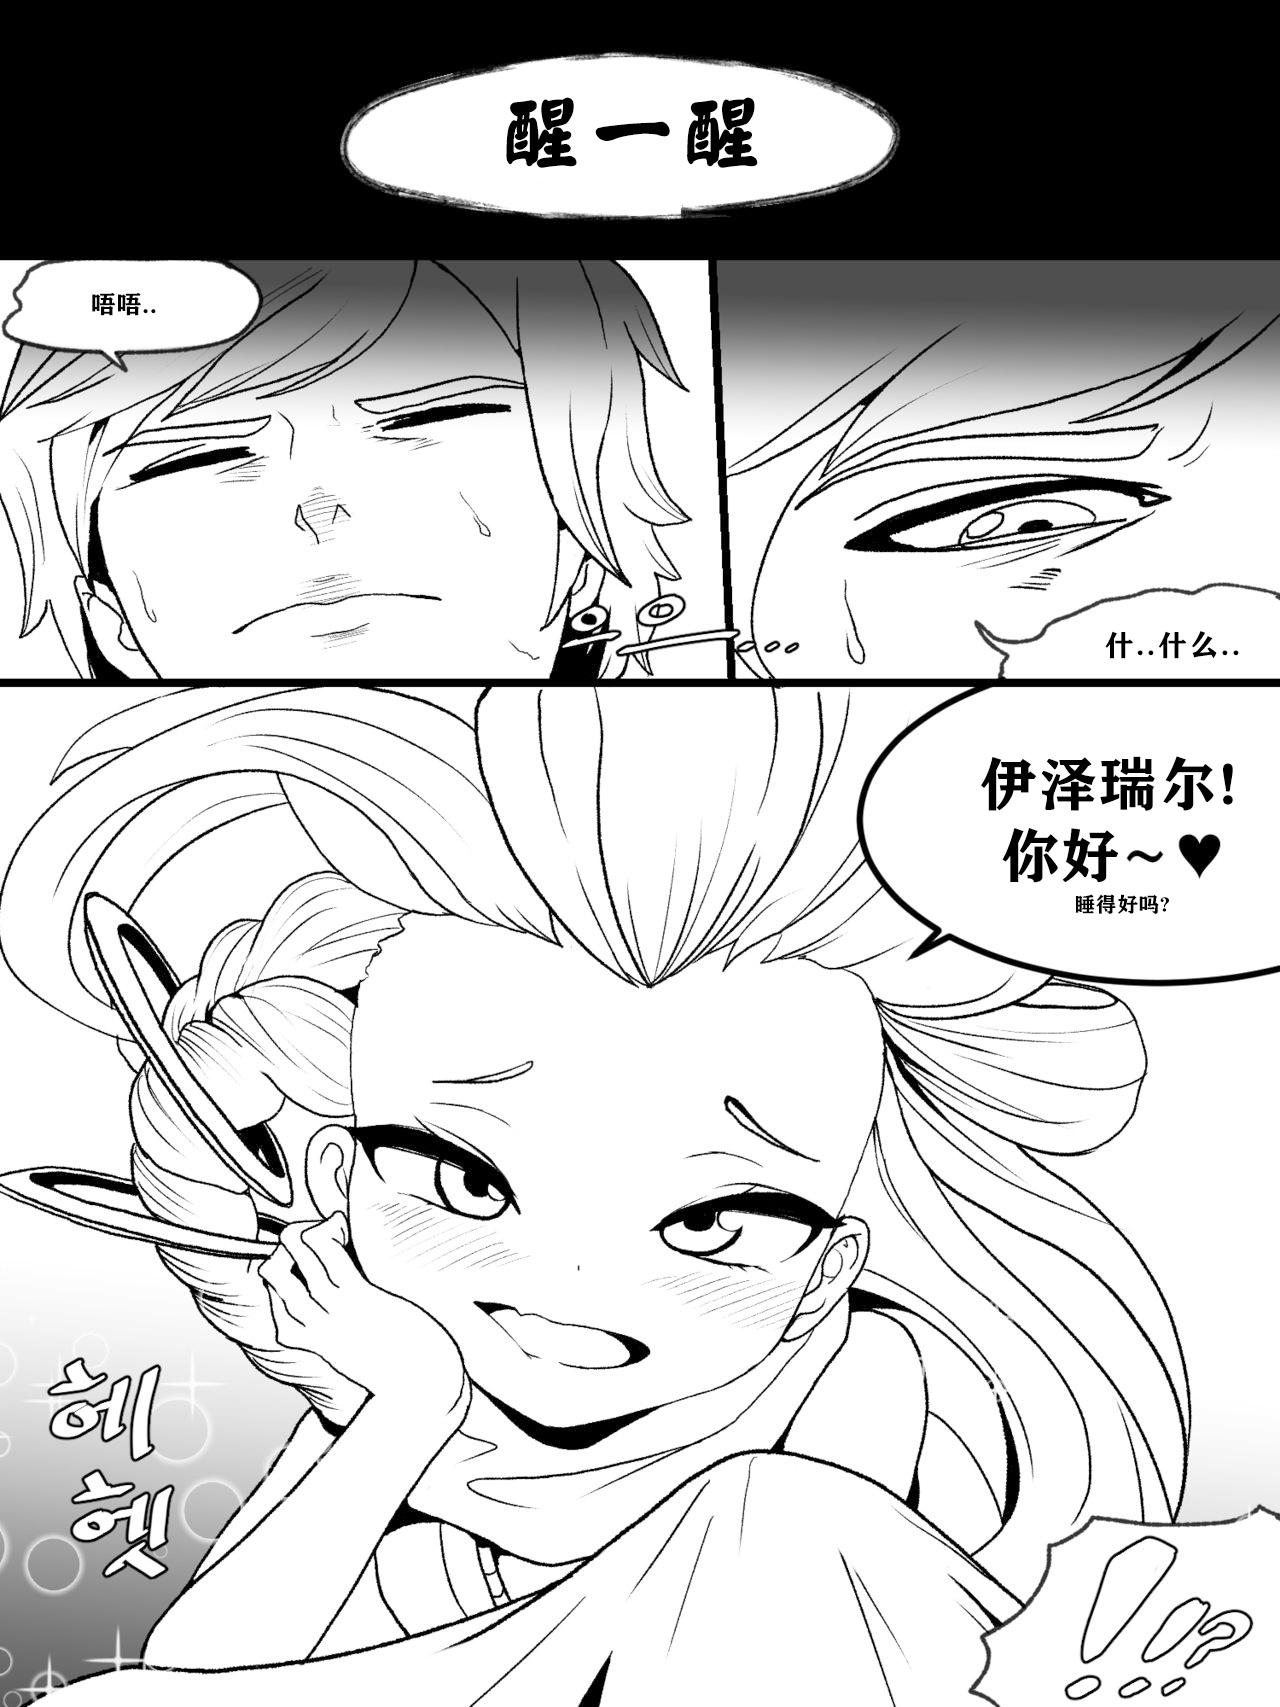 Leaked The reality in the starlight | 星光中的真实 - League of legends Italiana - Page 4